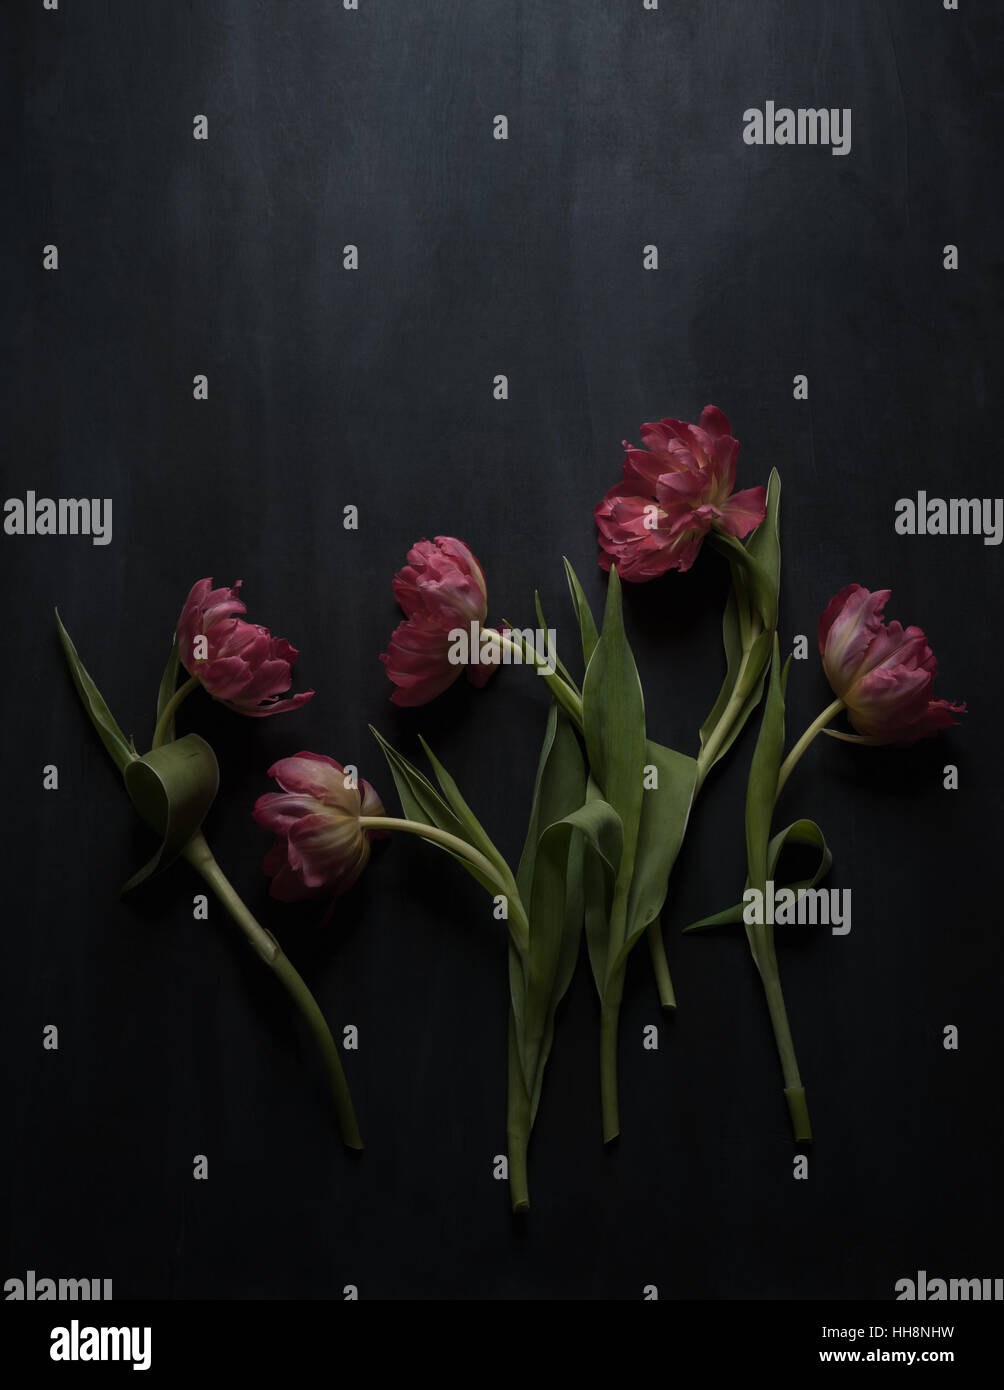 five pink double tulips on dark background Stock Photo